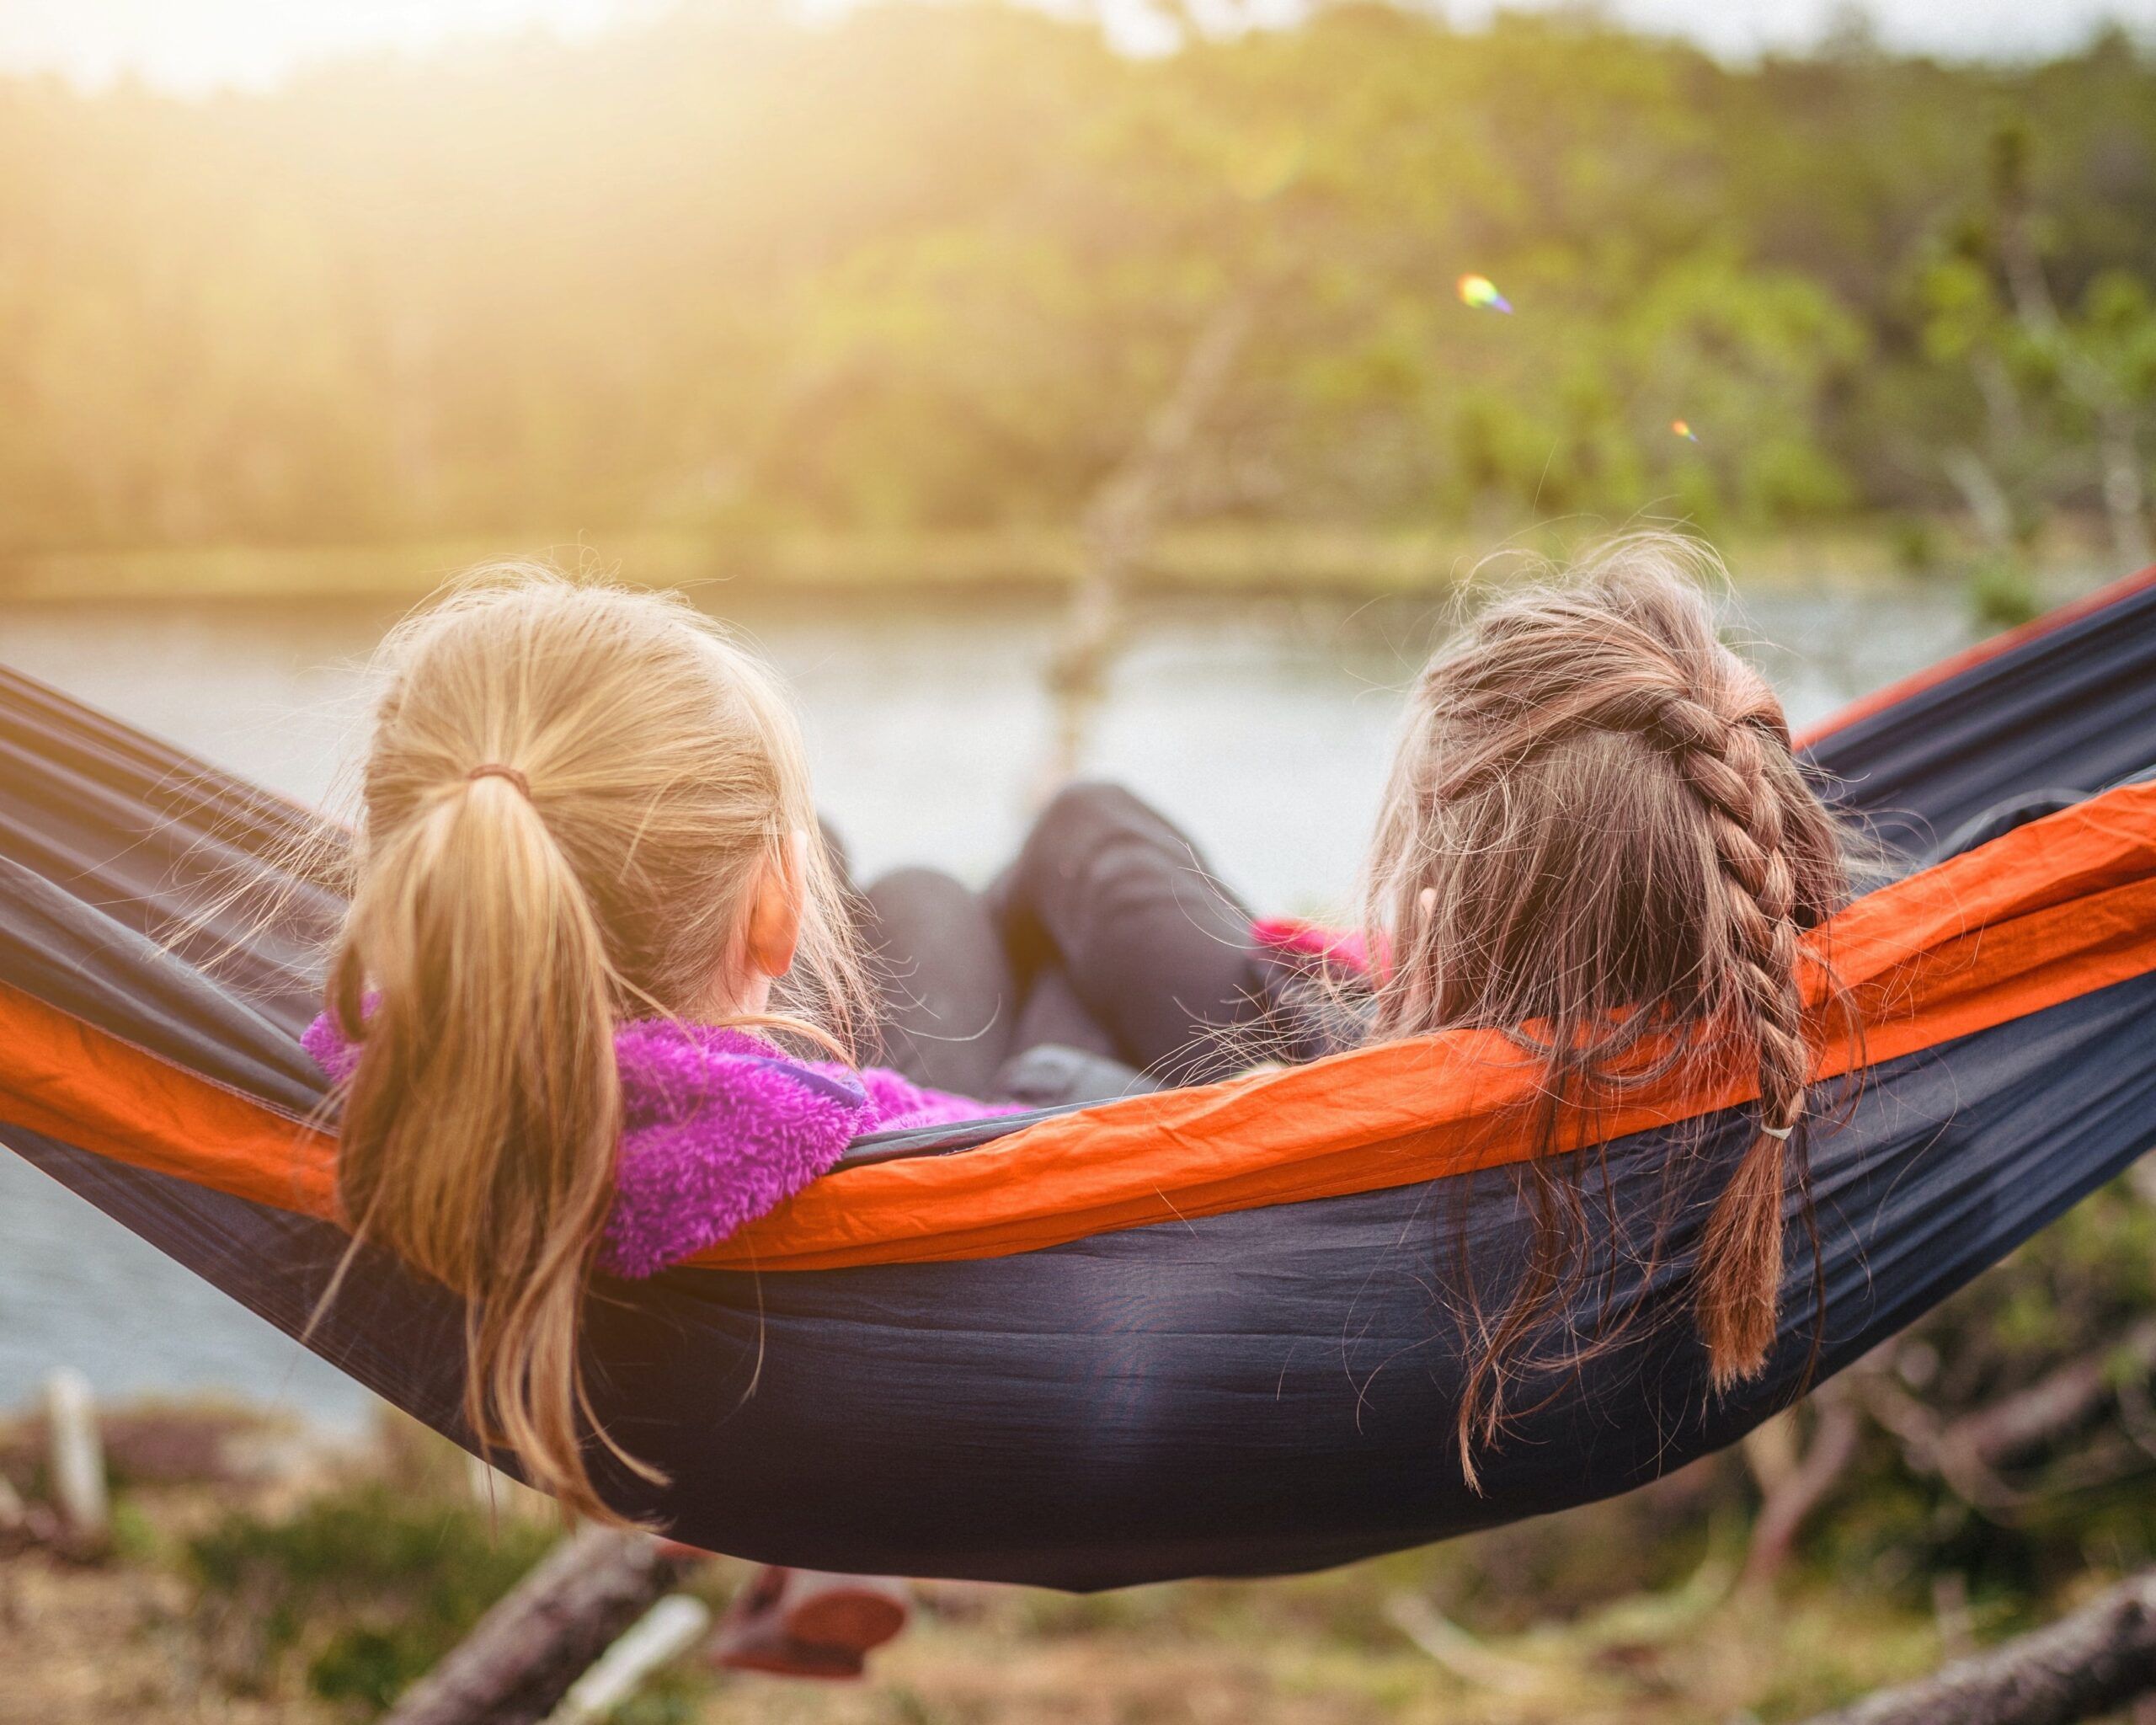 Image of two people in a hammock. Both have blonde hair